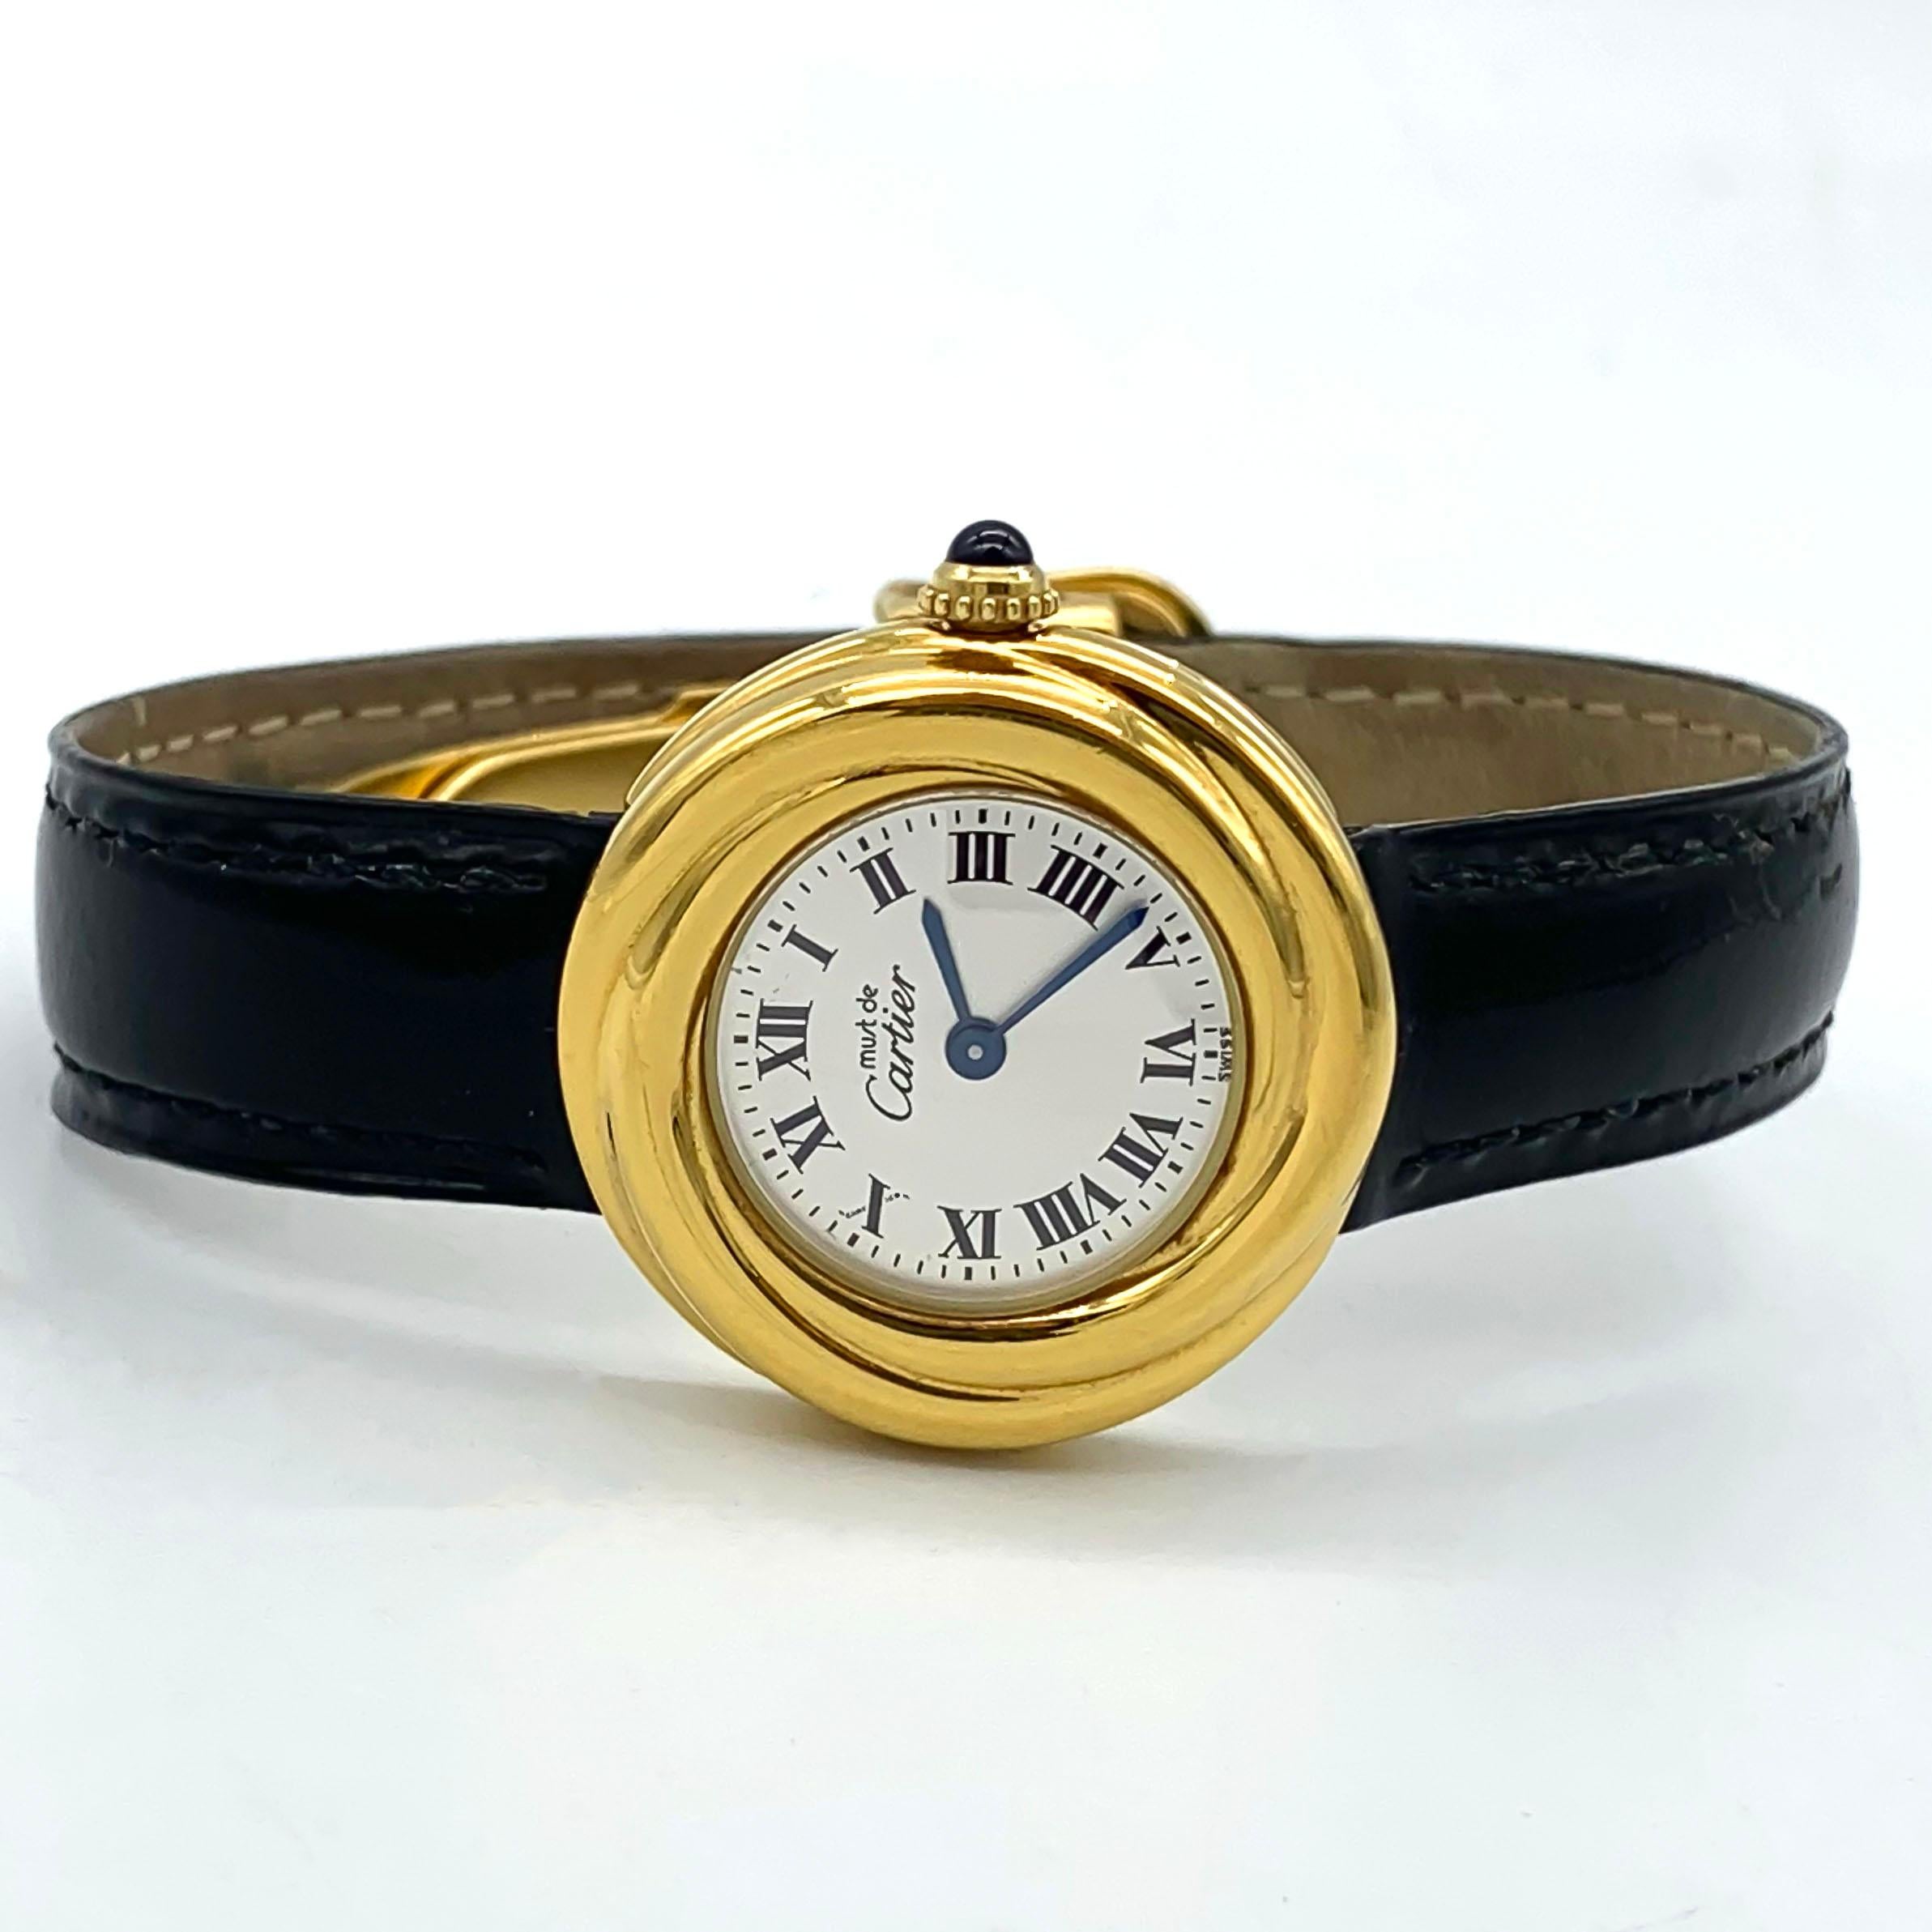 The Cartier Trinity Vermeil Must De Cartier 925 Silver  Ref. W1010644 2735 is a stunning women's wristwatch that combines timeless elegance with modern functionality. Crafted by the renowned luxury brand Cartier, it features a sleek silver case with